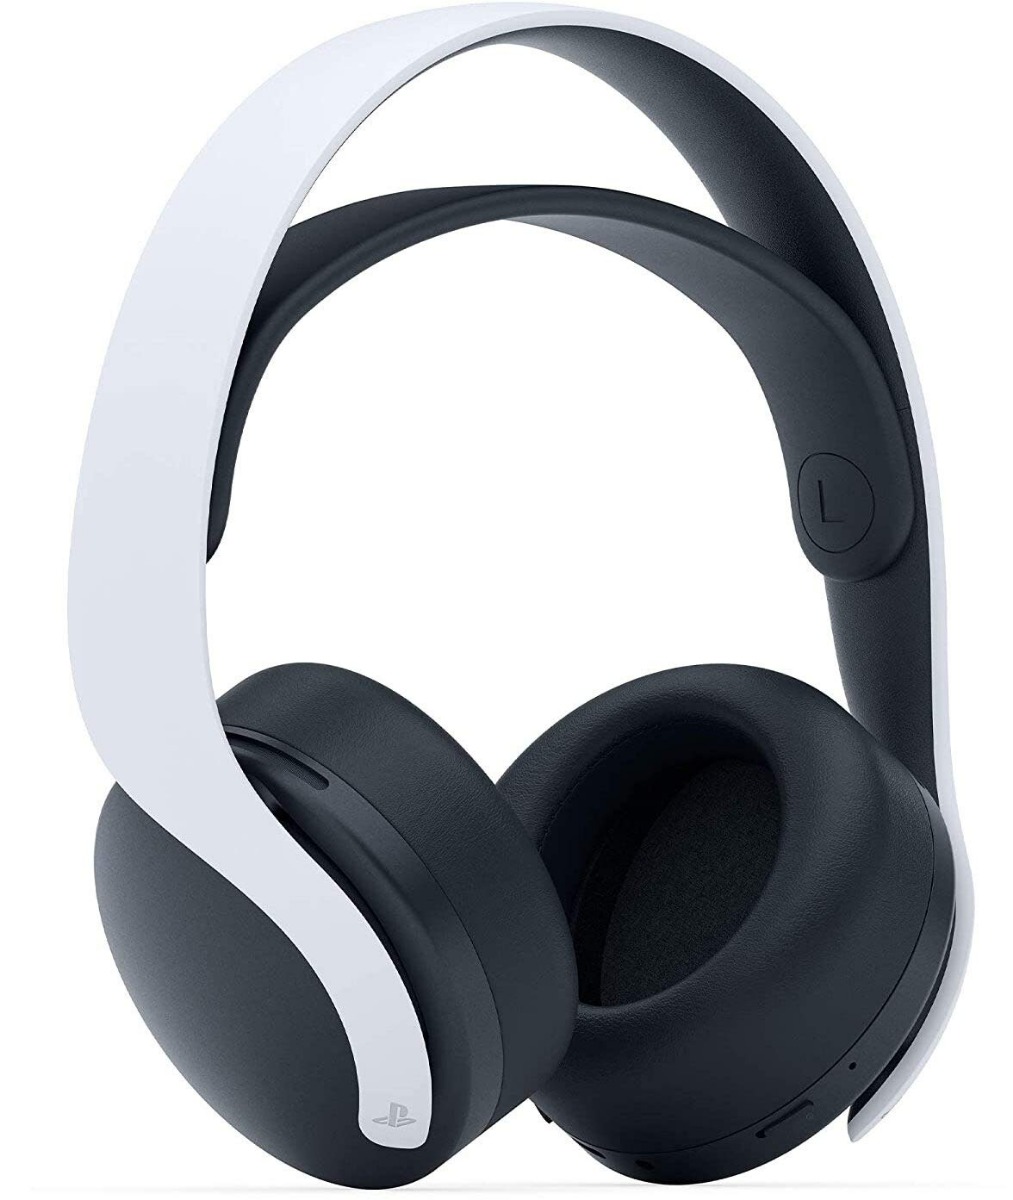 Sony Pulse 3D Wireless Headset for PlayStation 5 - White Black